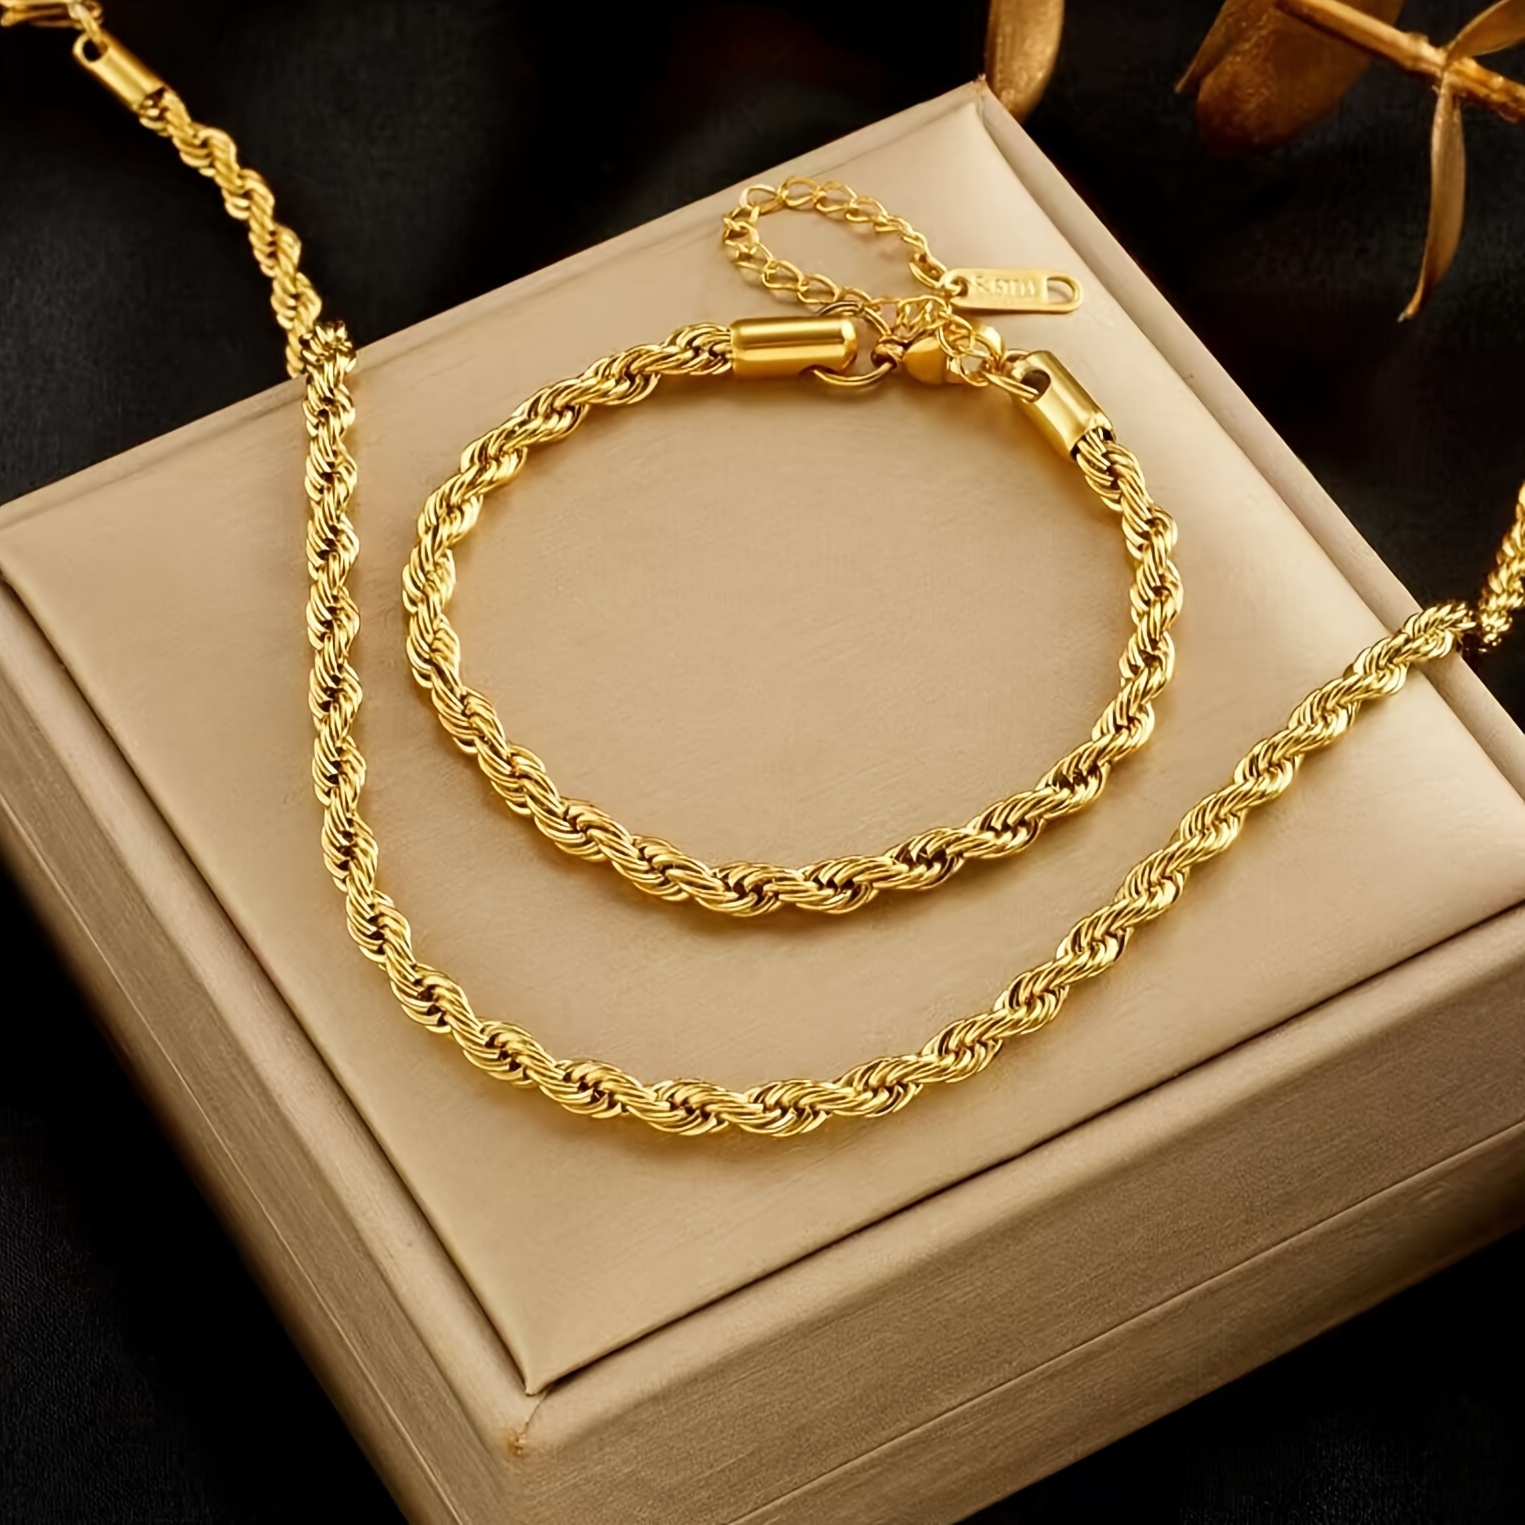 

2pcs/ Set, Golden Stainless Woven Twist Design Necklace, Bracelet Set, Classic & Retro Style, Fashion Delicate Accessory For Daily Wear & Party, Idea Gift For Couple & Friends